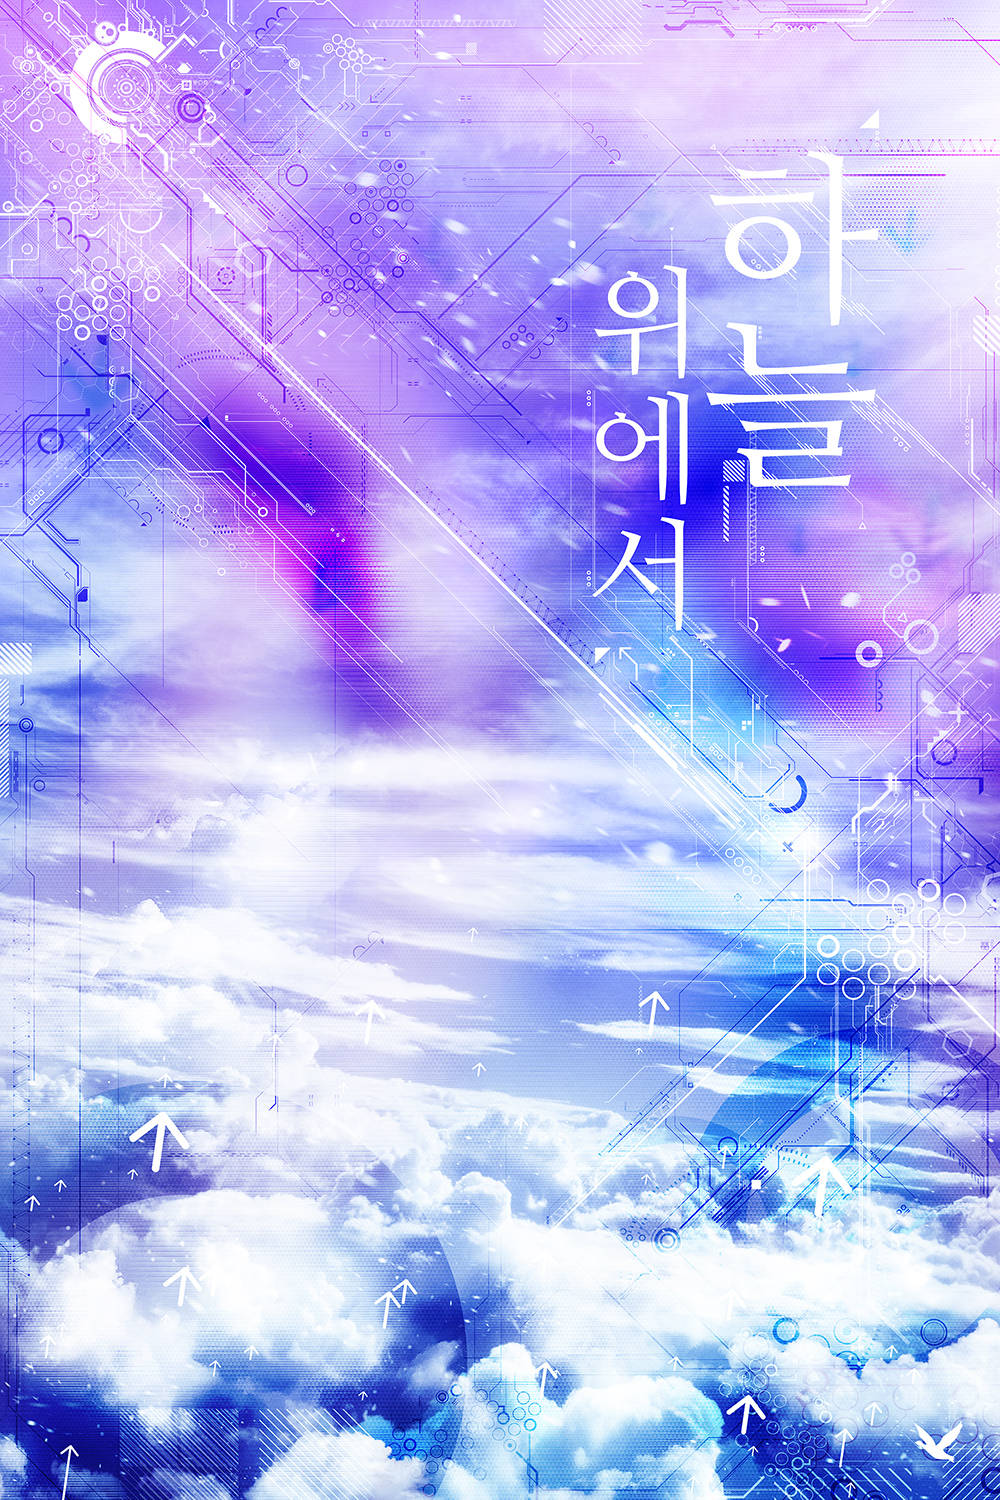 on-the-clouds-001.jpg